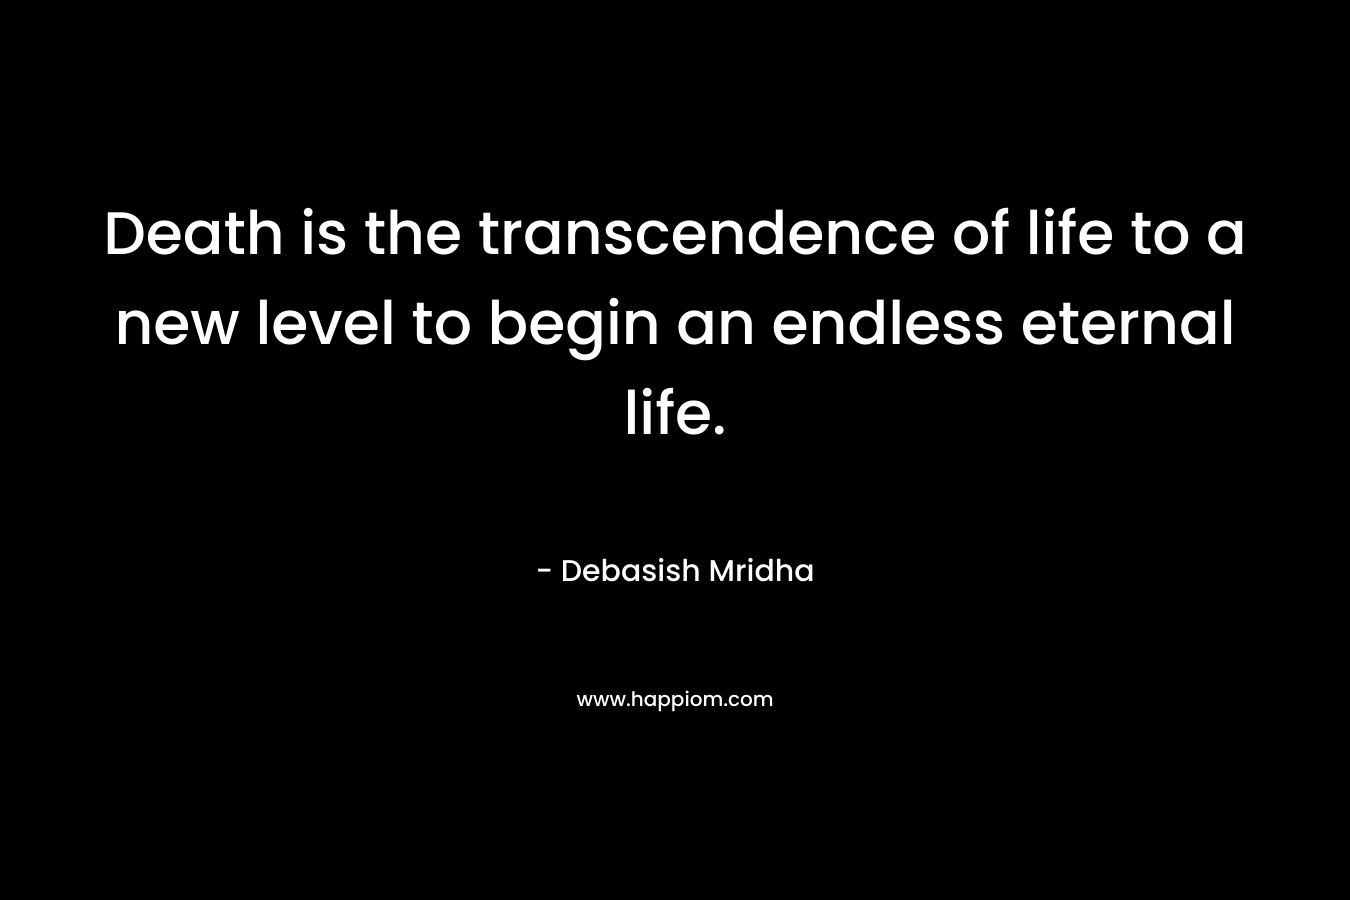 Death is the transcendence of life to a new level to begin an endless eternal life. – Debasish Mridha